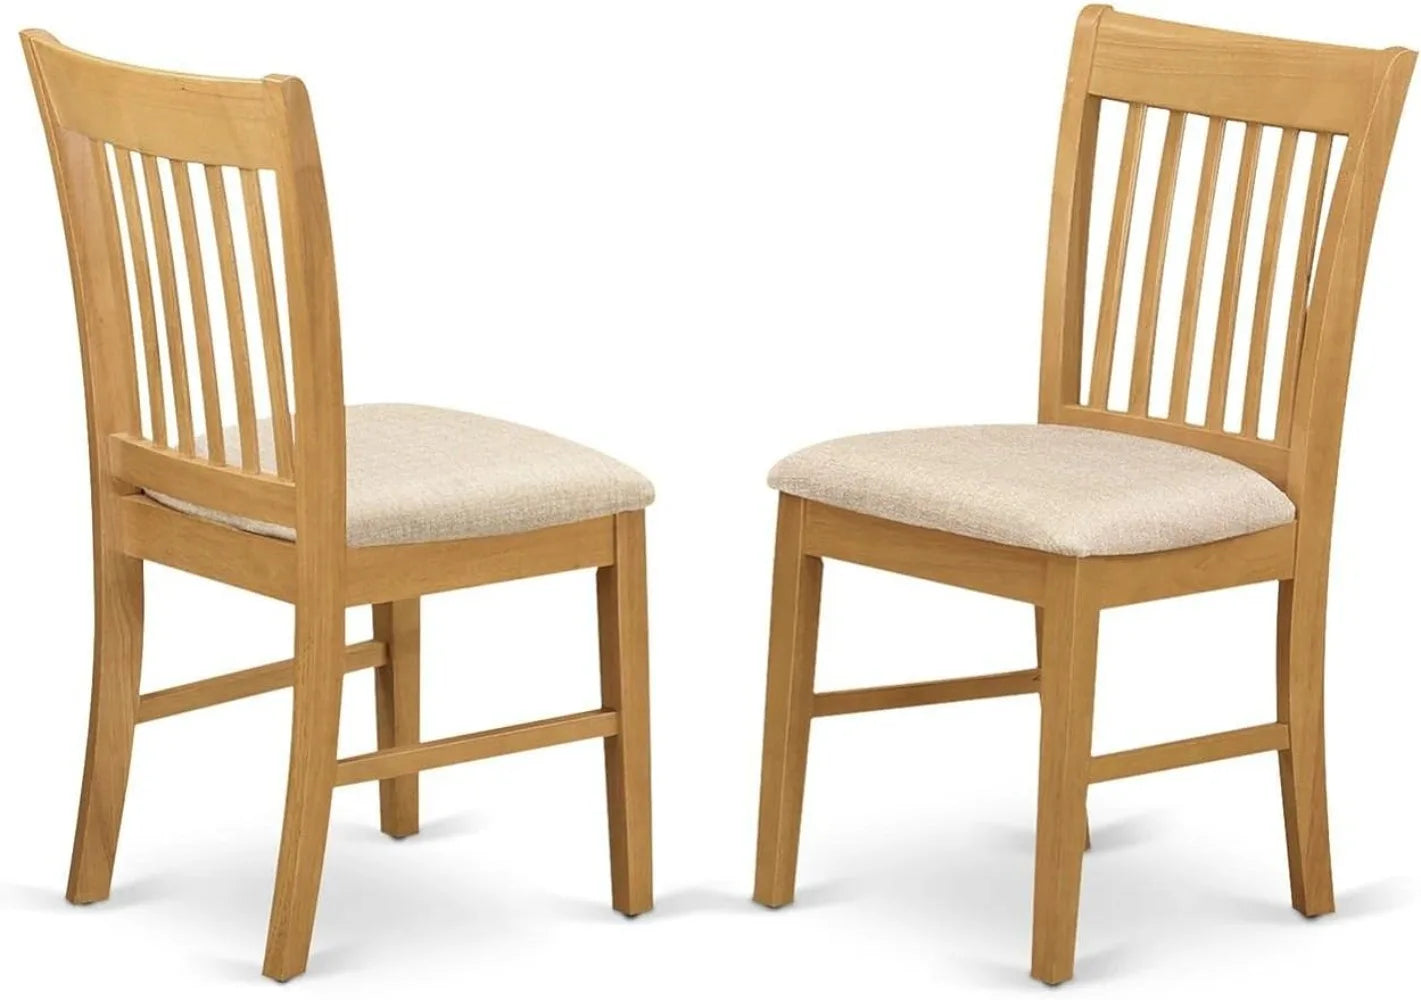 Upholstered Wooden Kitchen Dining Chairs, Set of 2-Dining Room Chairs-NOFRAN Furniture